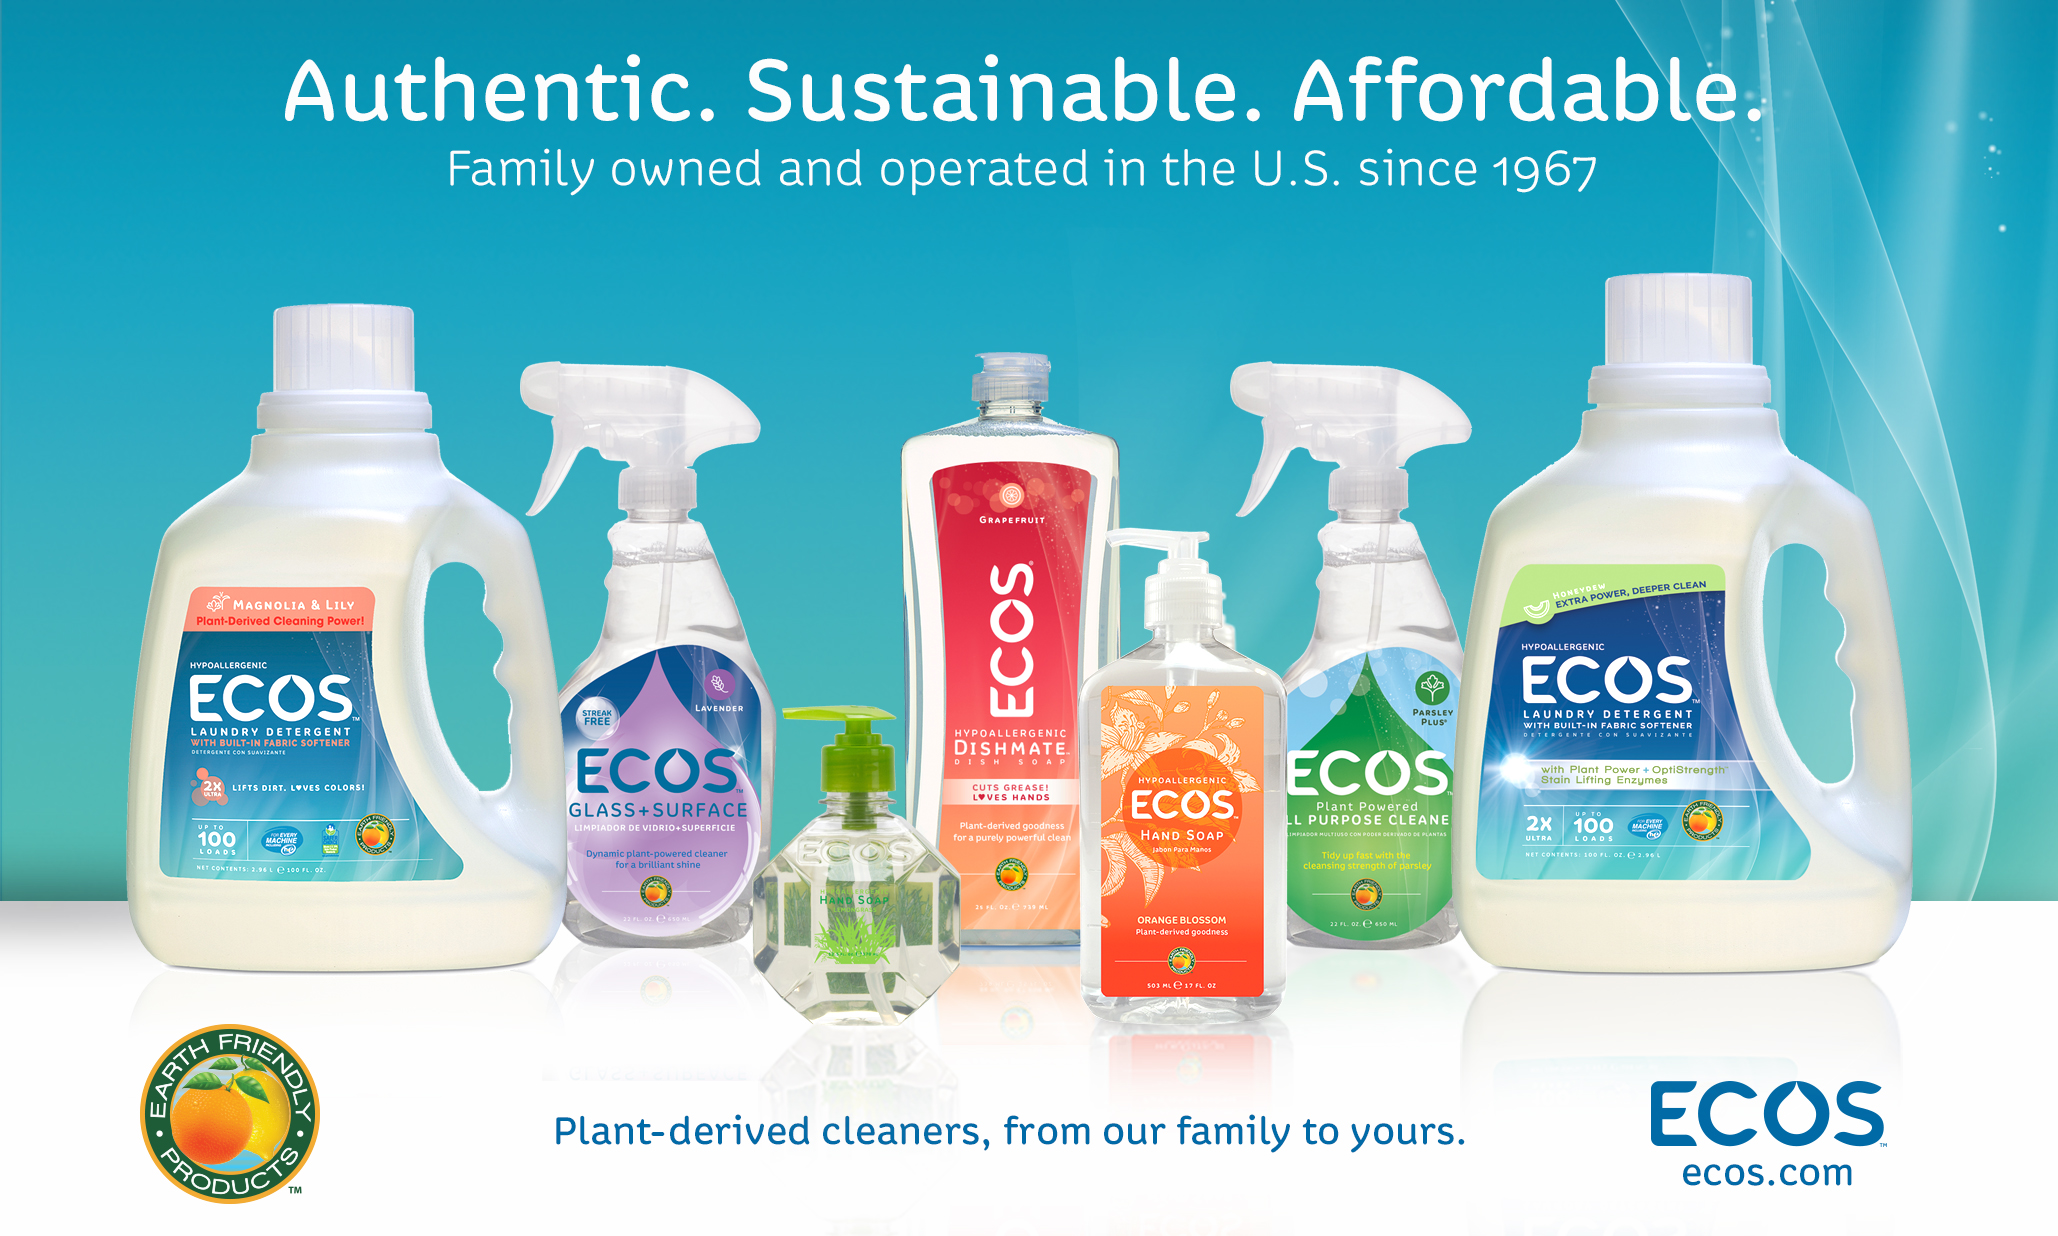 Choosing healthy and eco-friendly personal care and home care products -  Eupedia